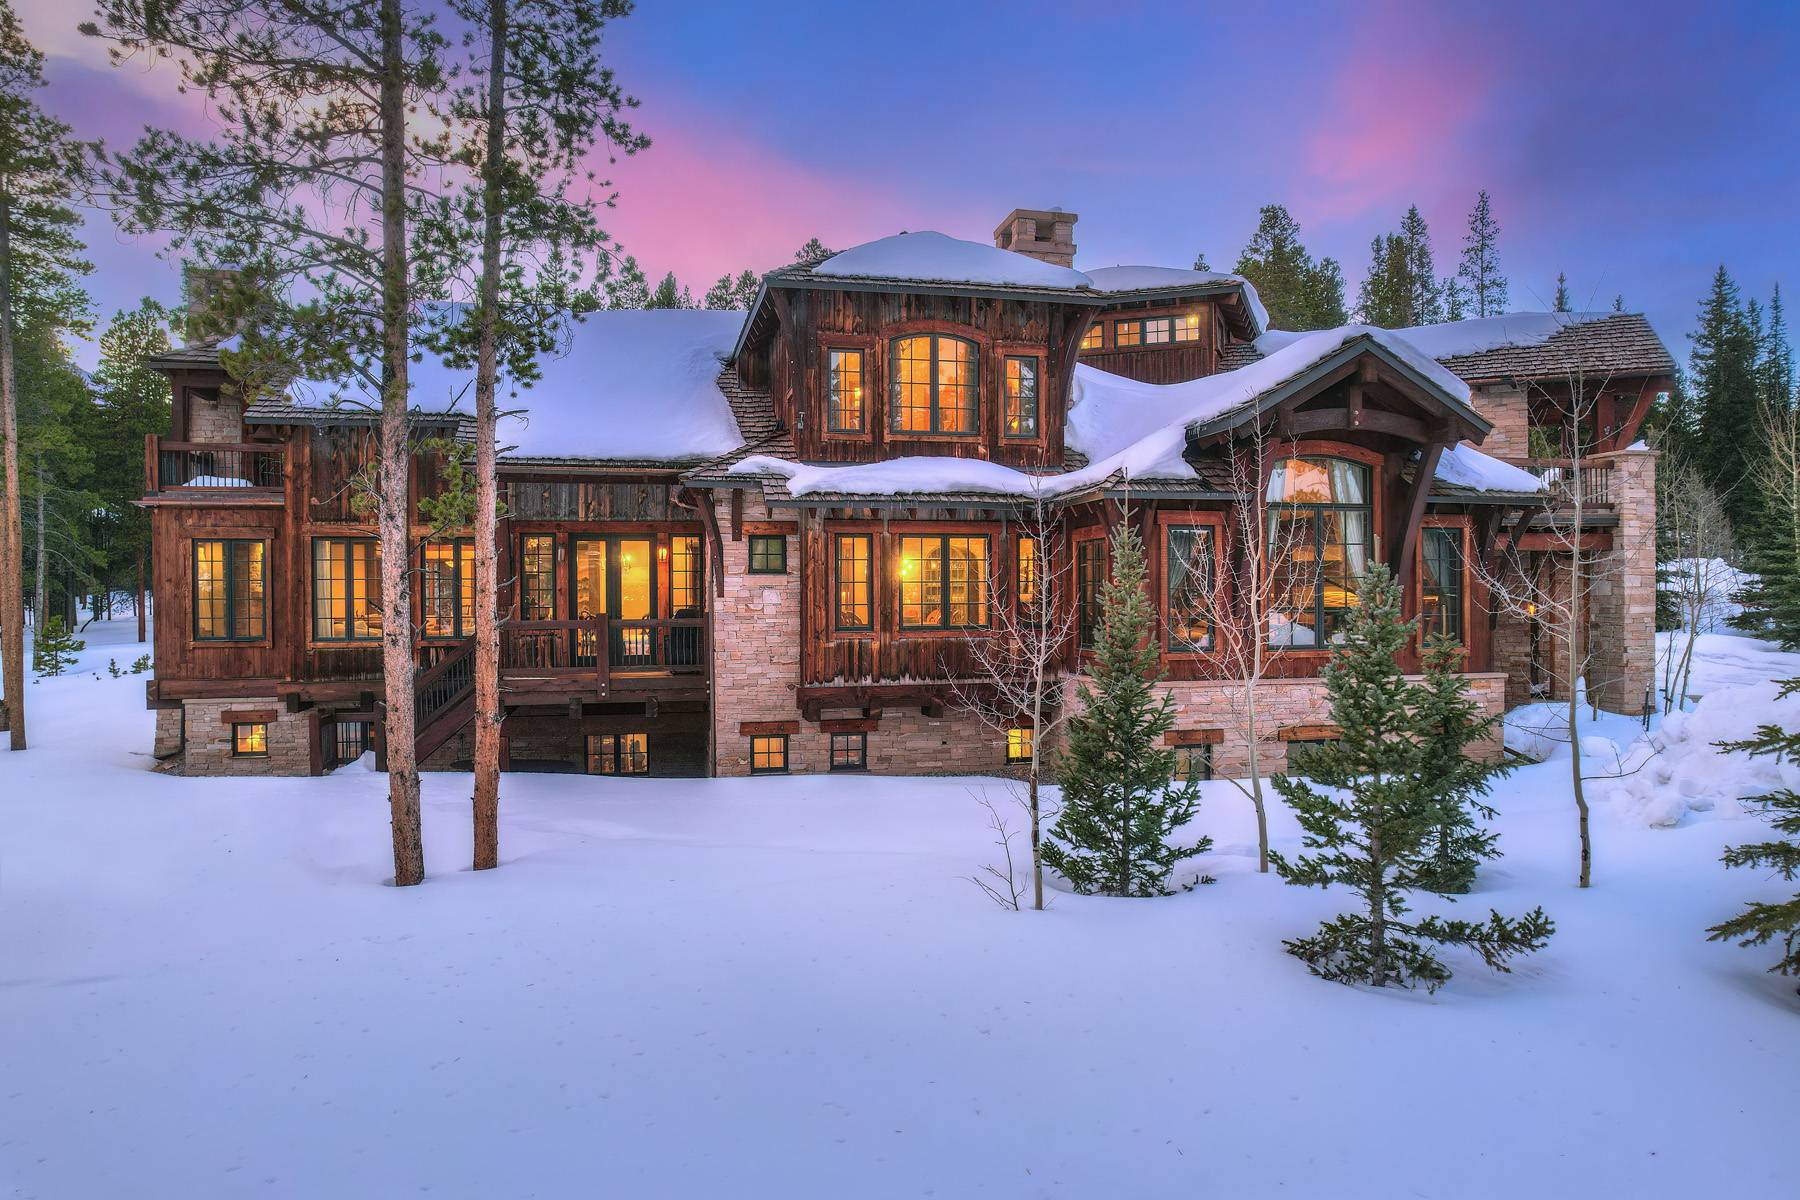 Colorado Legacy Home in the Rocky Mountains